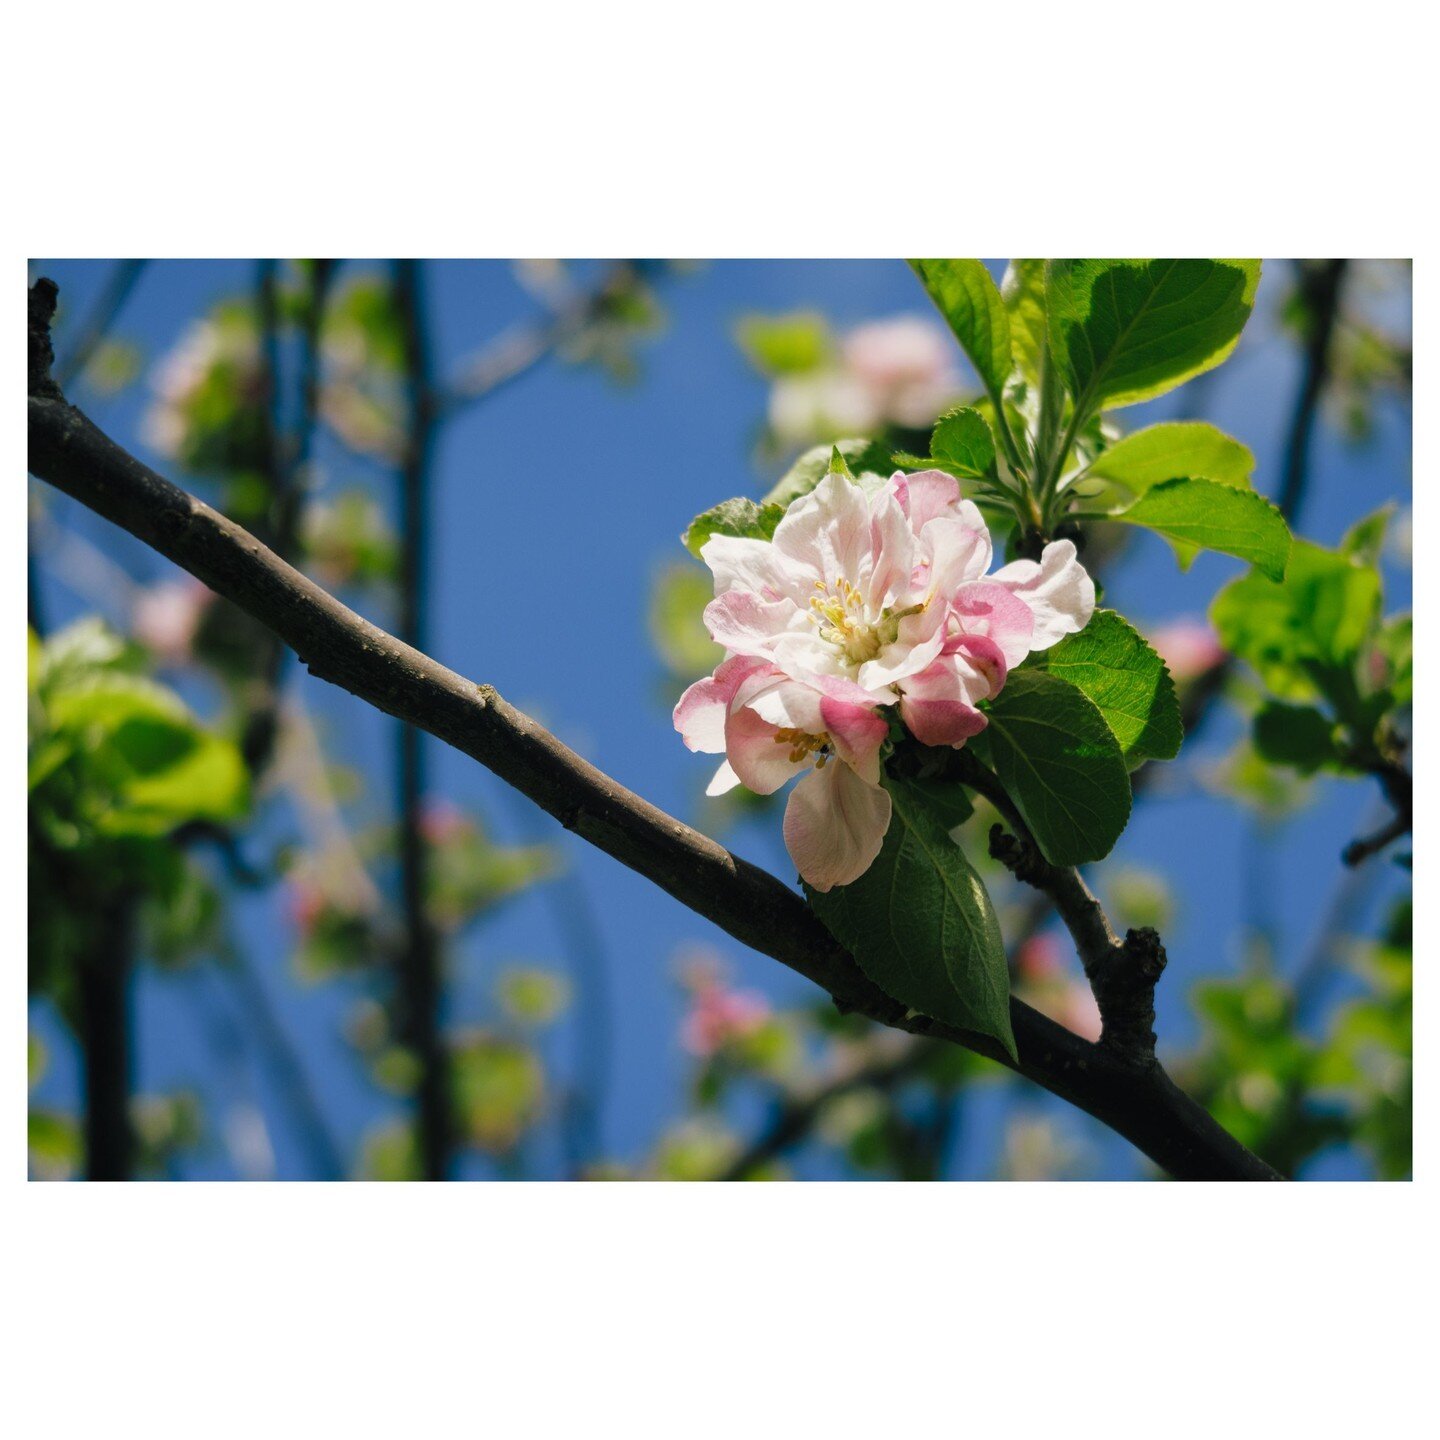 Cherry Blossom's tend to get all the glory this time of year, but let's not forget the beauty of delicate Apple Blossoms . These too are an incredibly beautiful flower and are just as enchanting!

#AppleBlossomSeason #CherryBlossomWatch #SpringBlooms